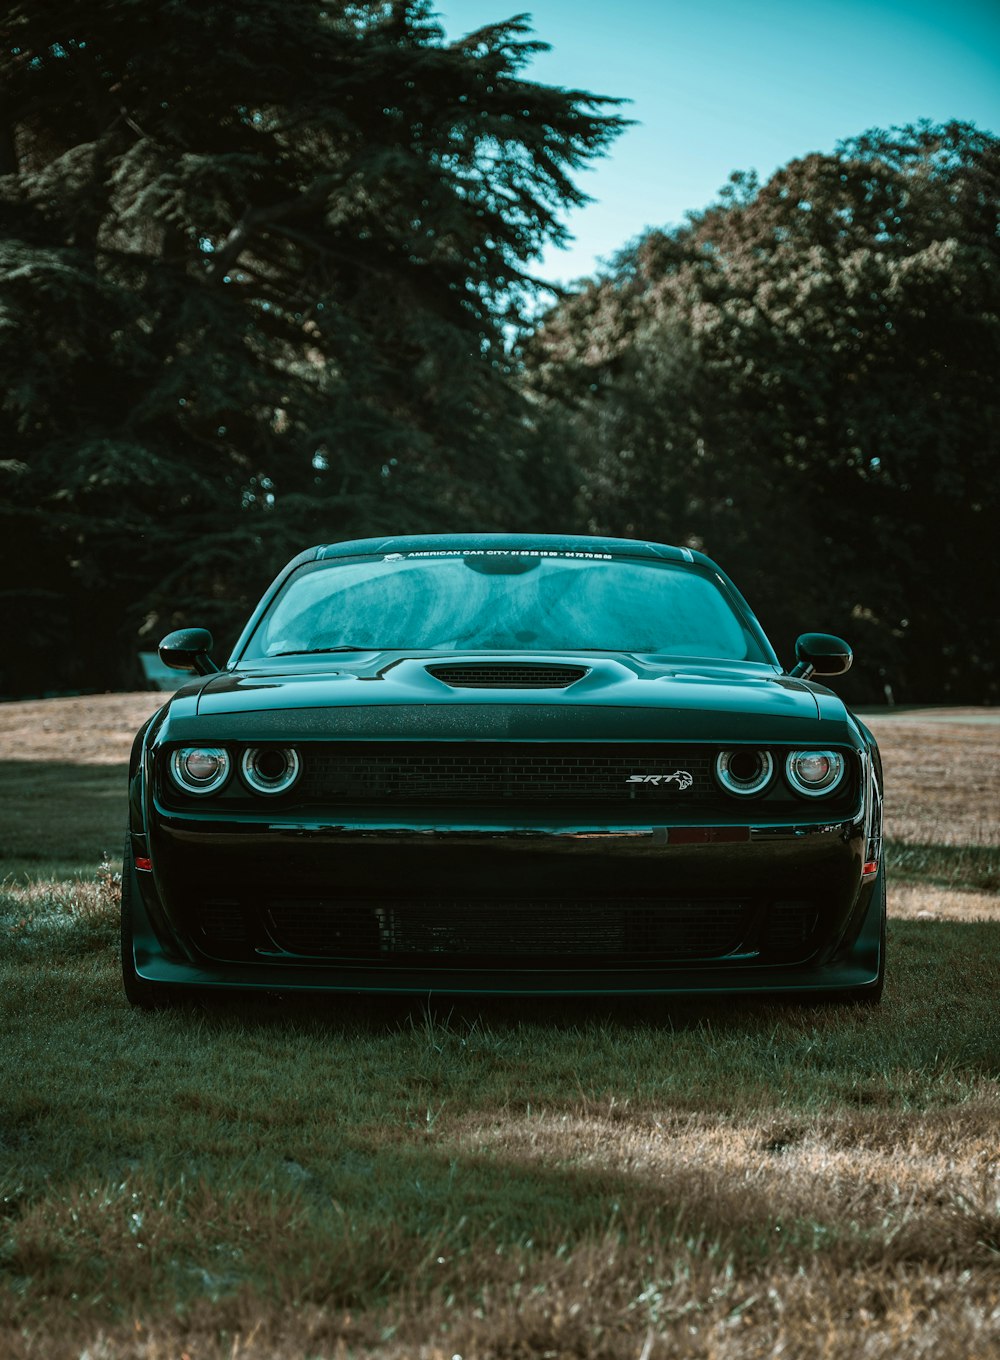 a black sports car parked in the grass